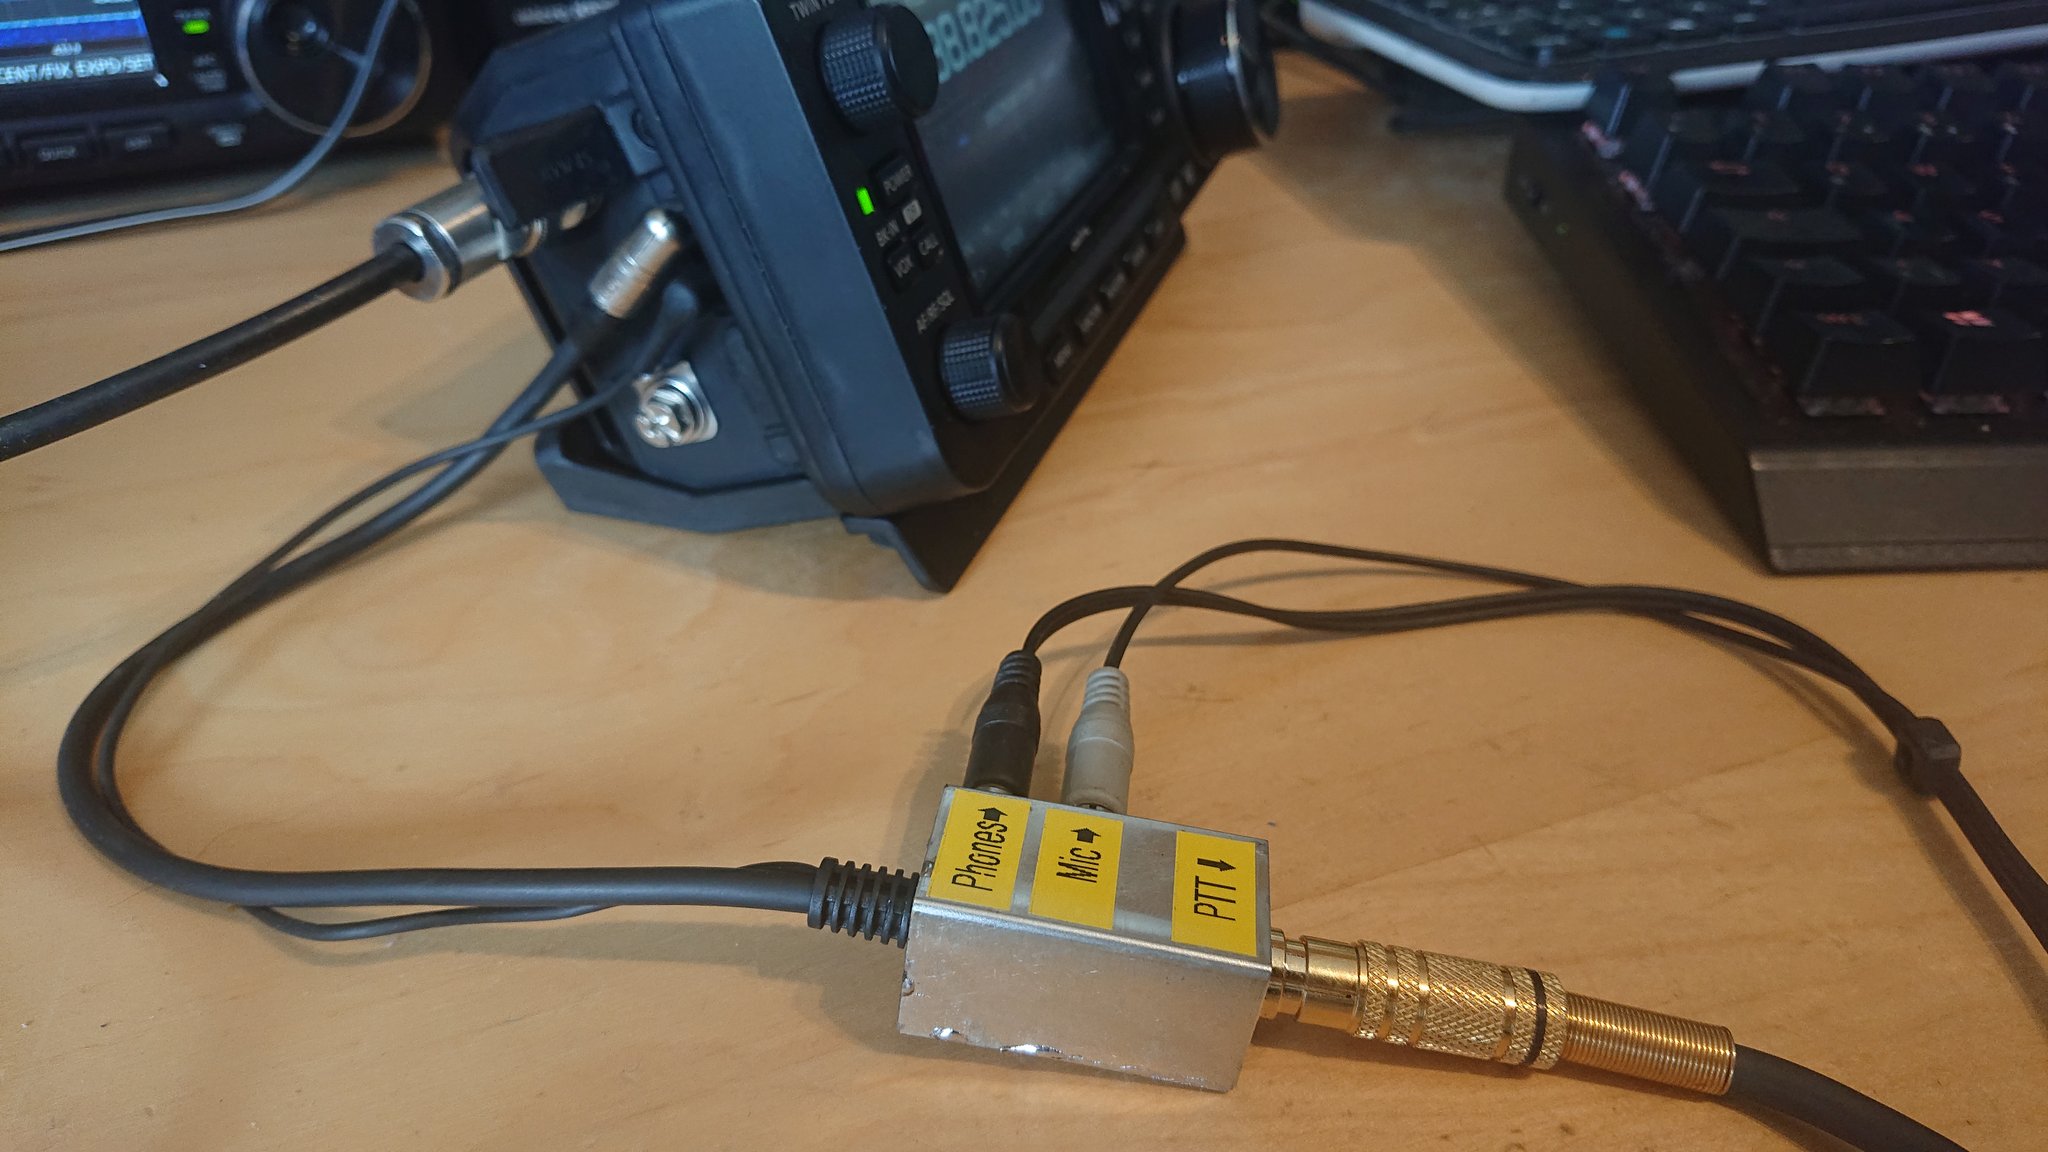 IC-705 Headset Adapter connected